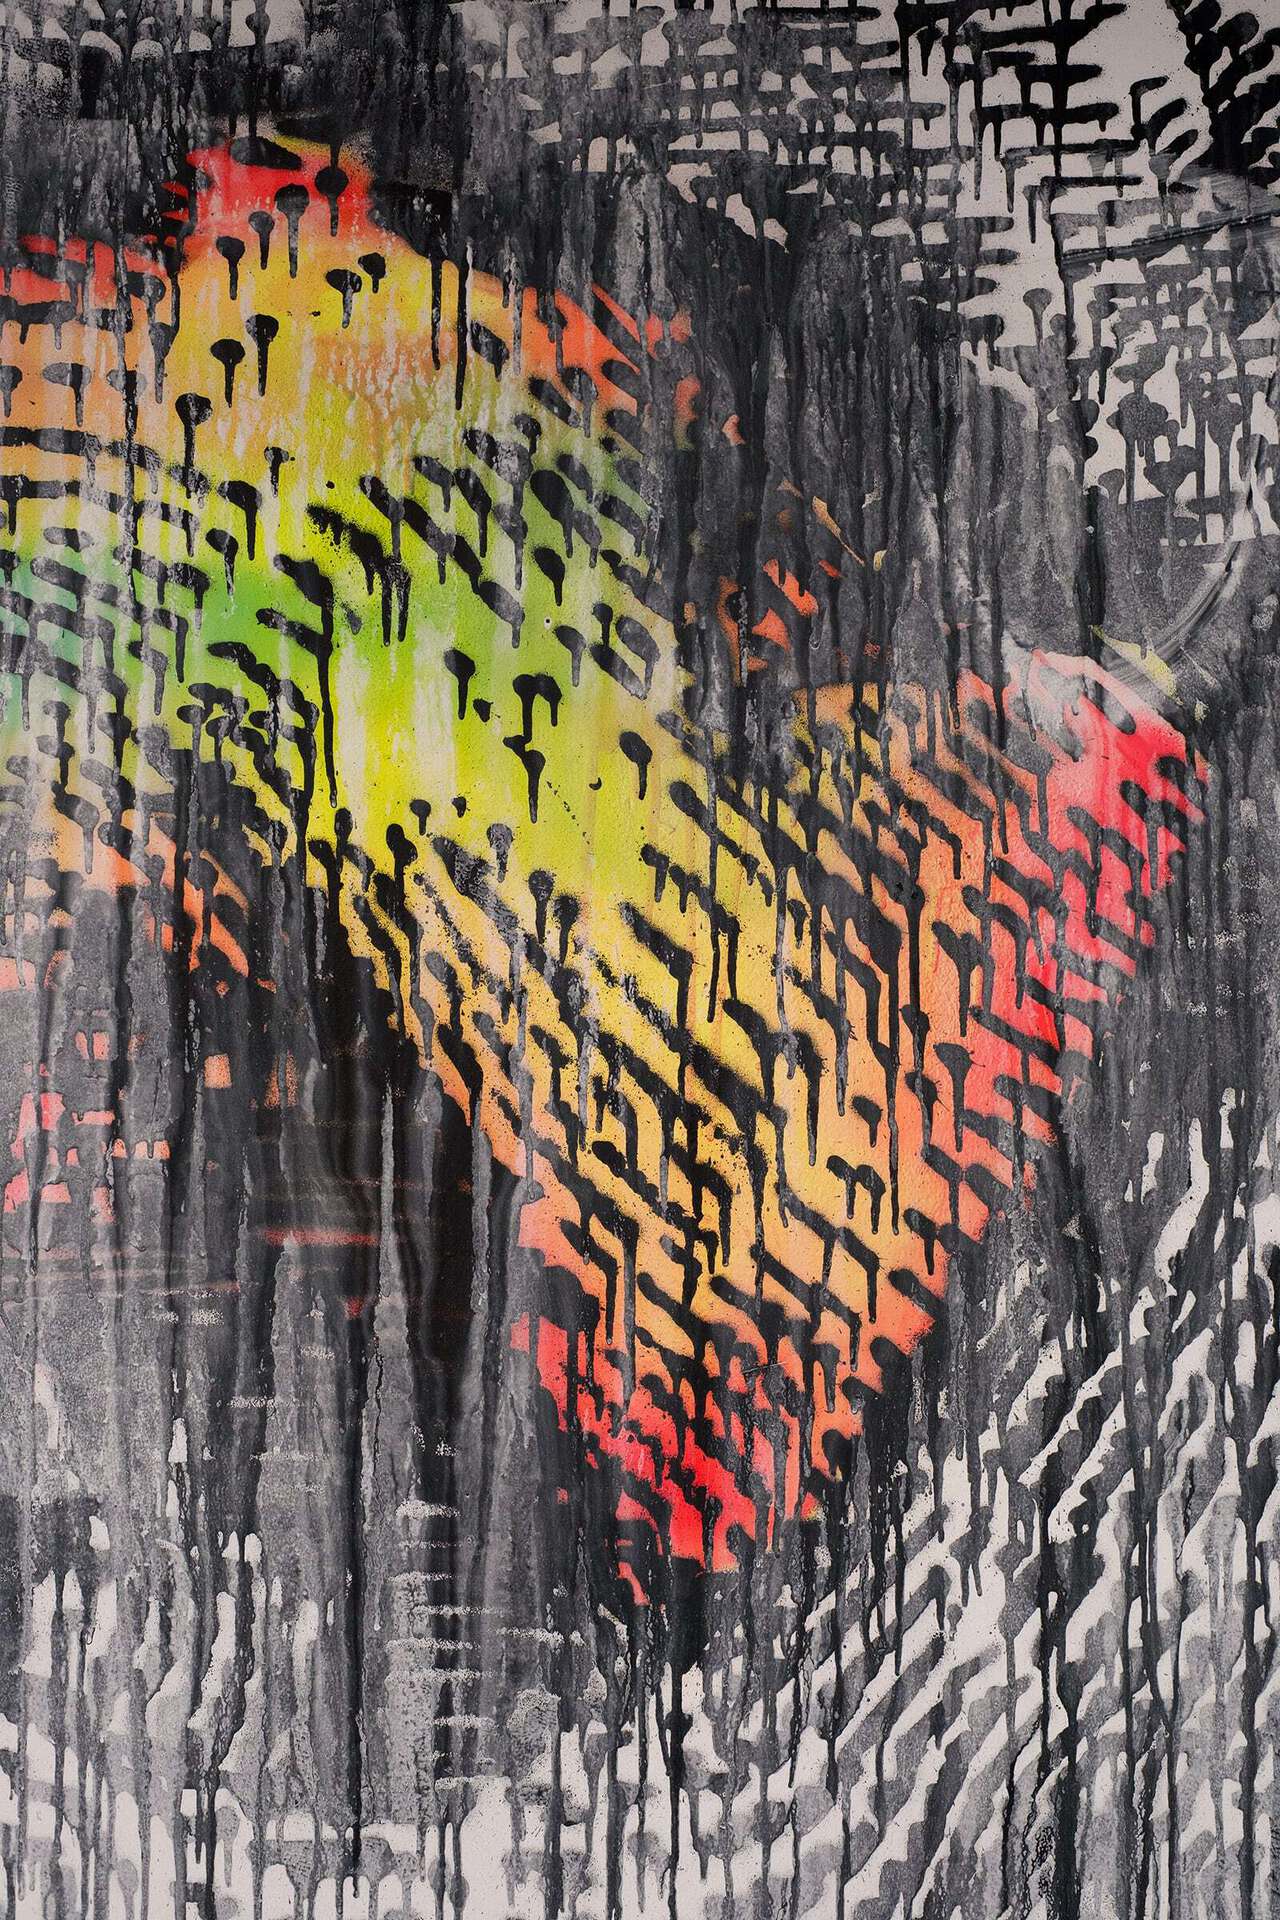 Andrey Berger, Untitled (detail), 2021, wall drawing, dementions very